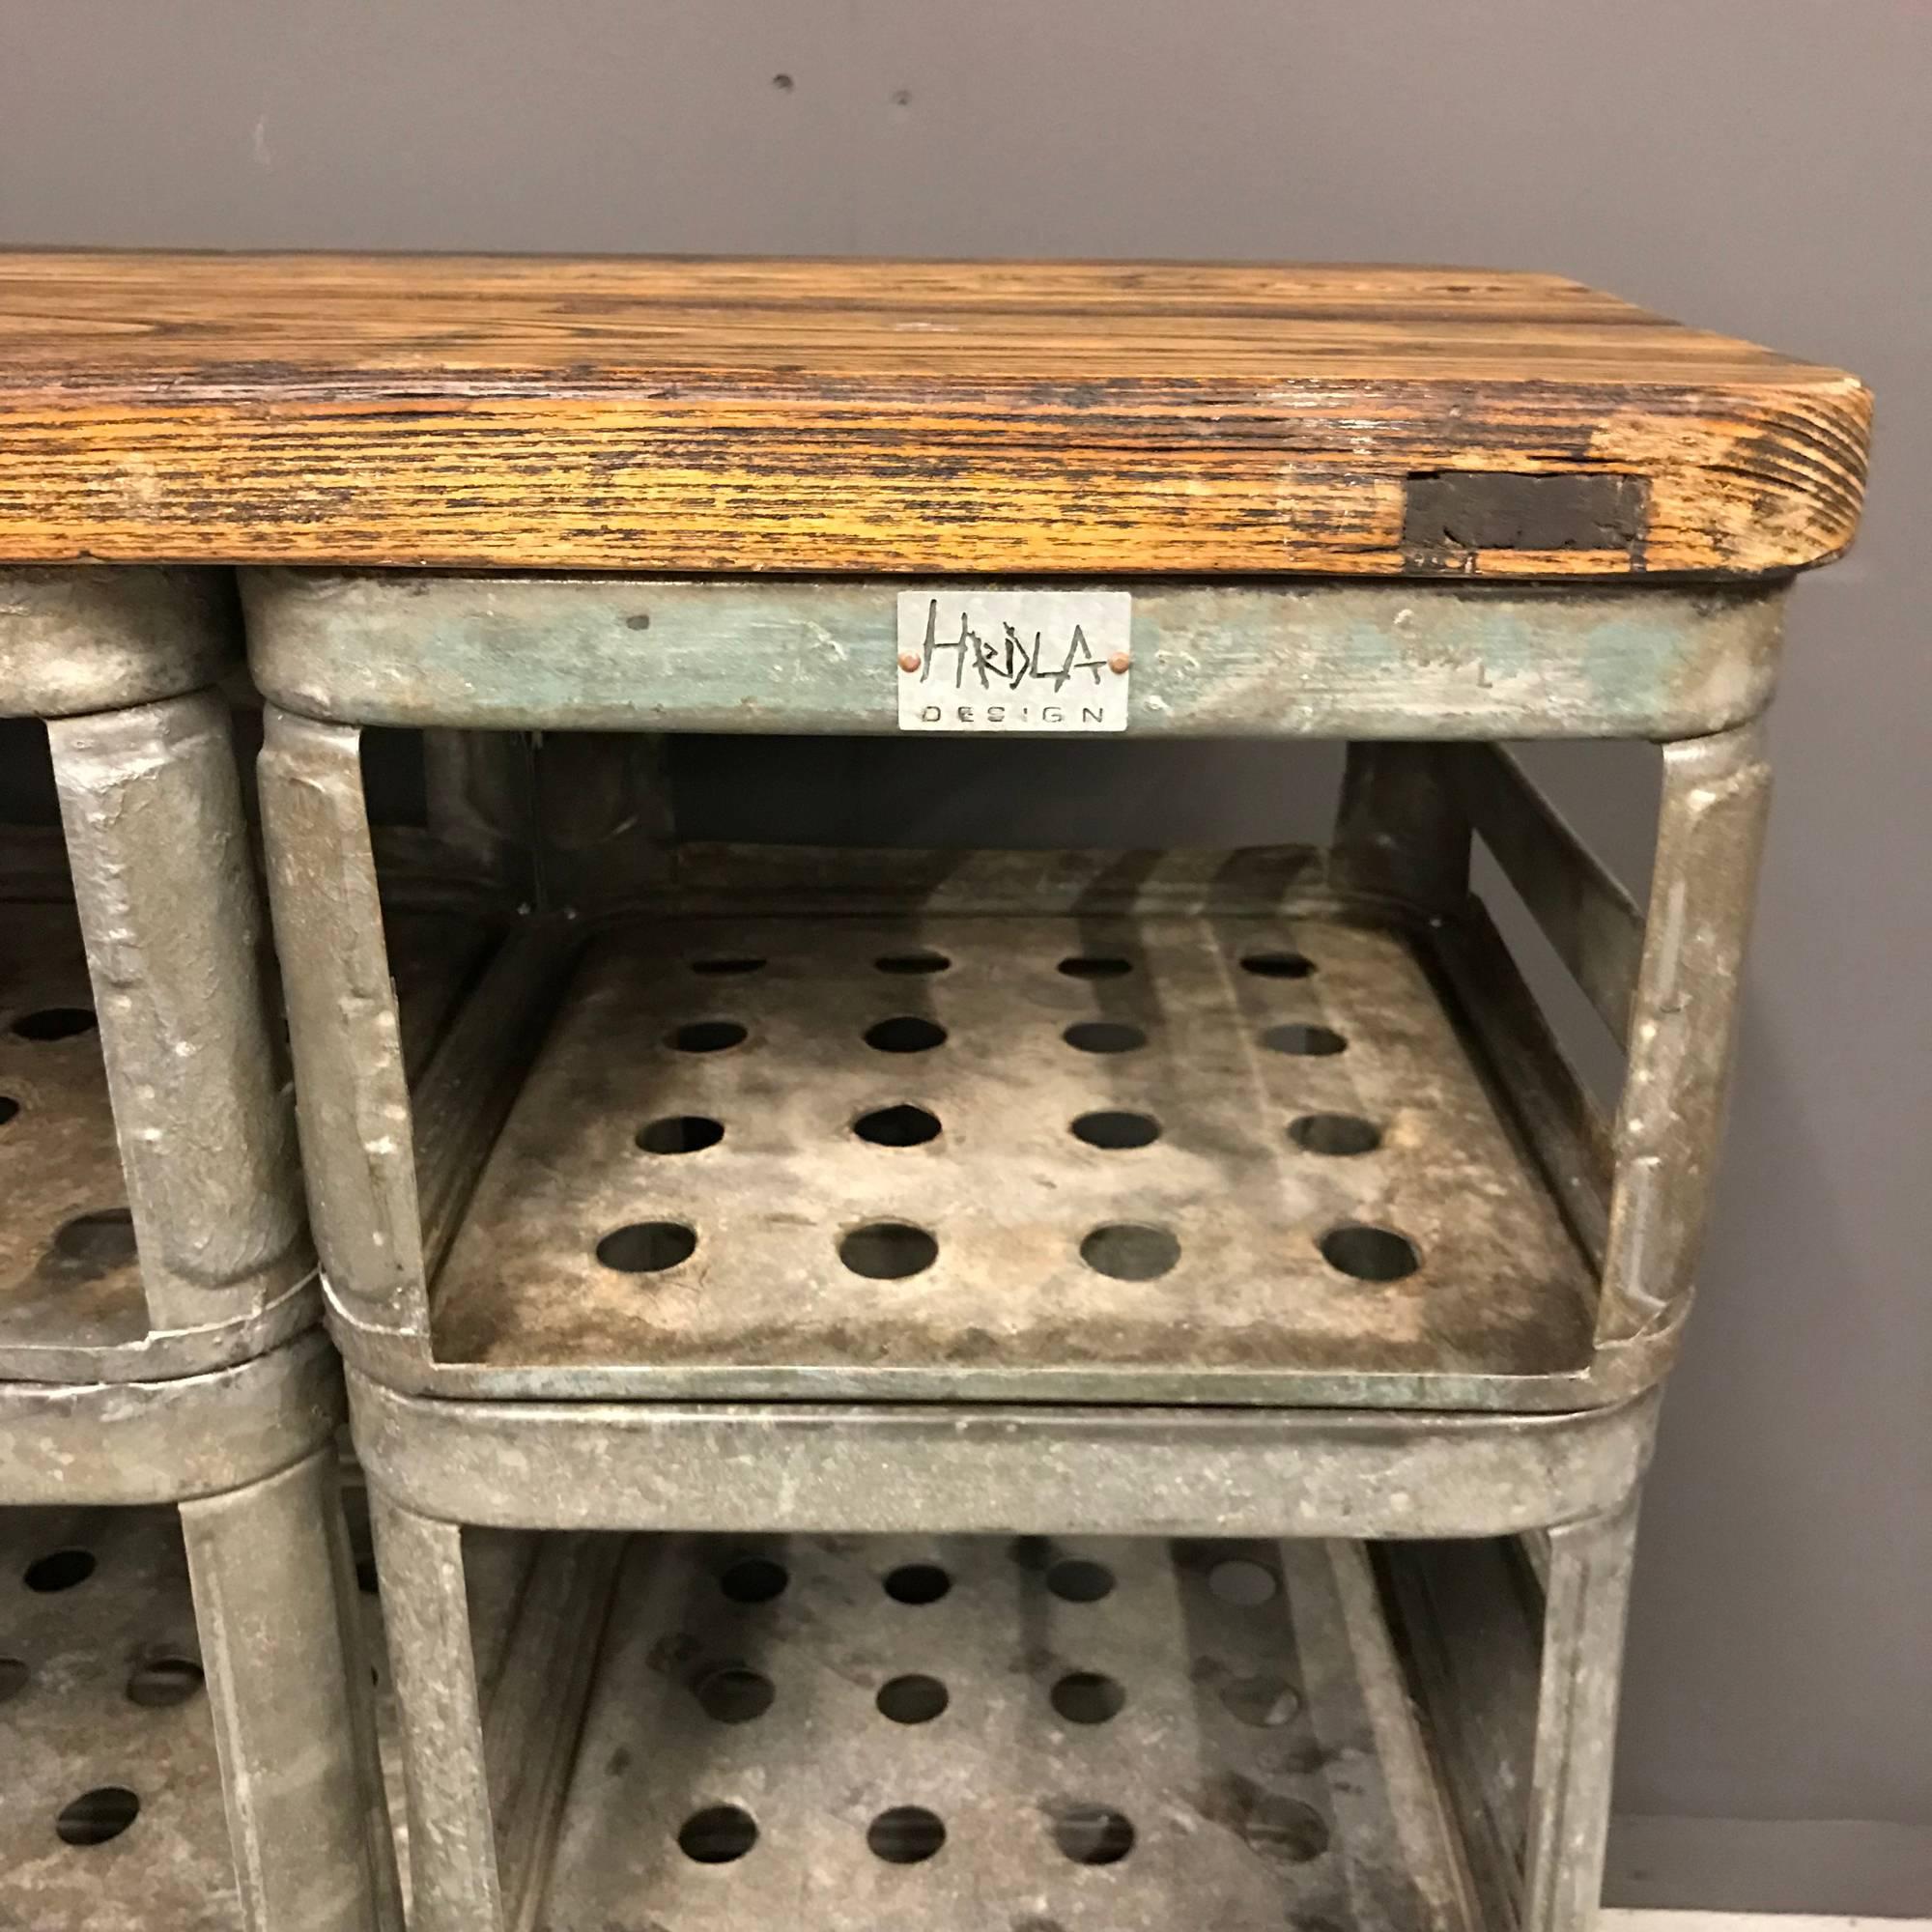 Mid-20th Century Industrial Shelving Unit by Hrdla Design For Sale